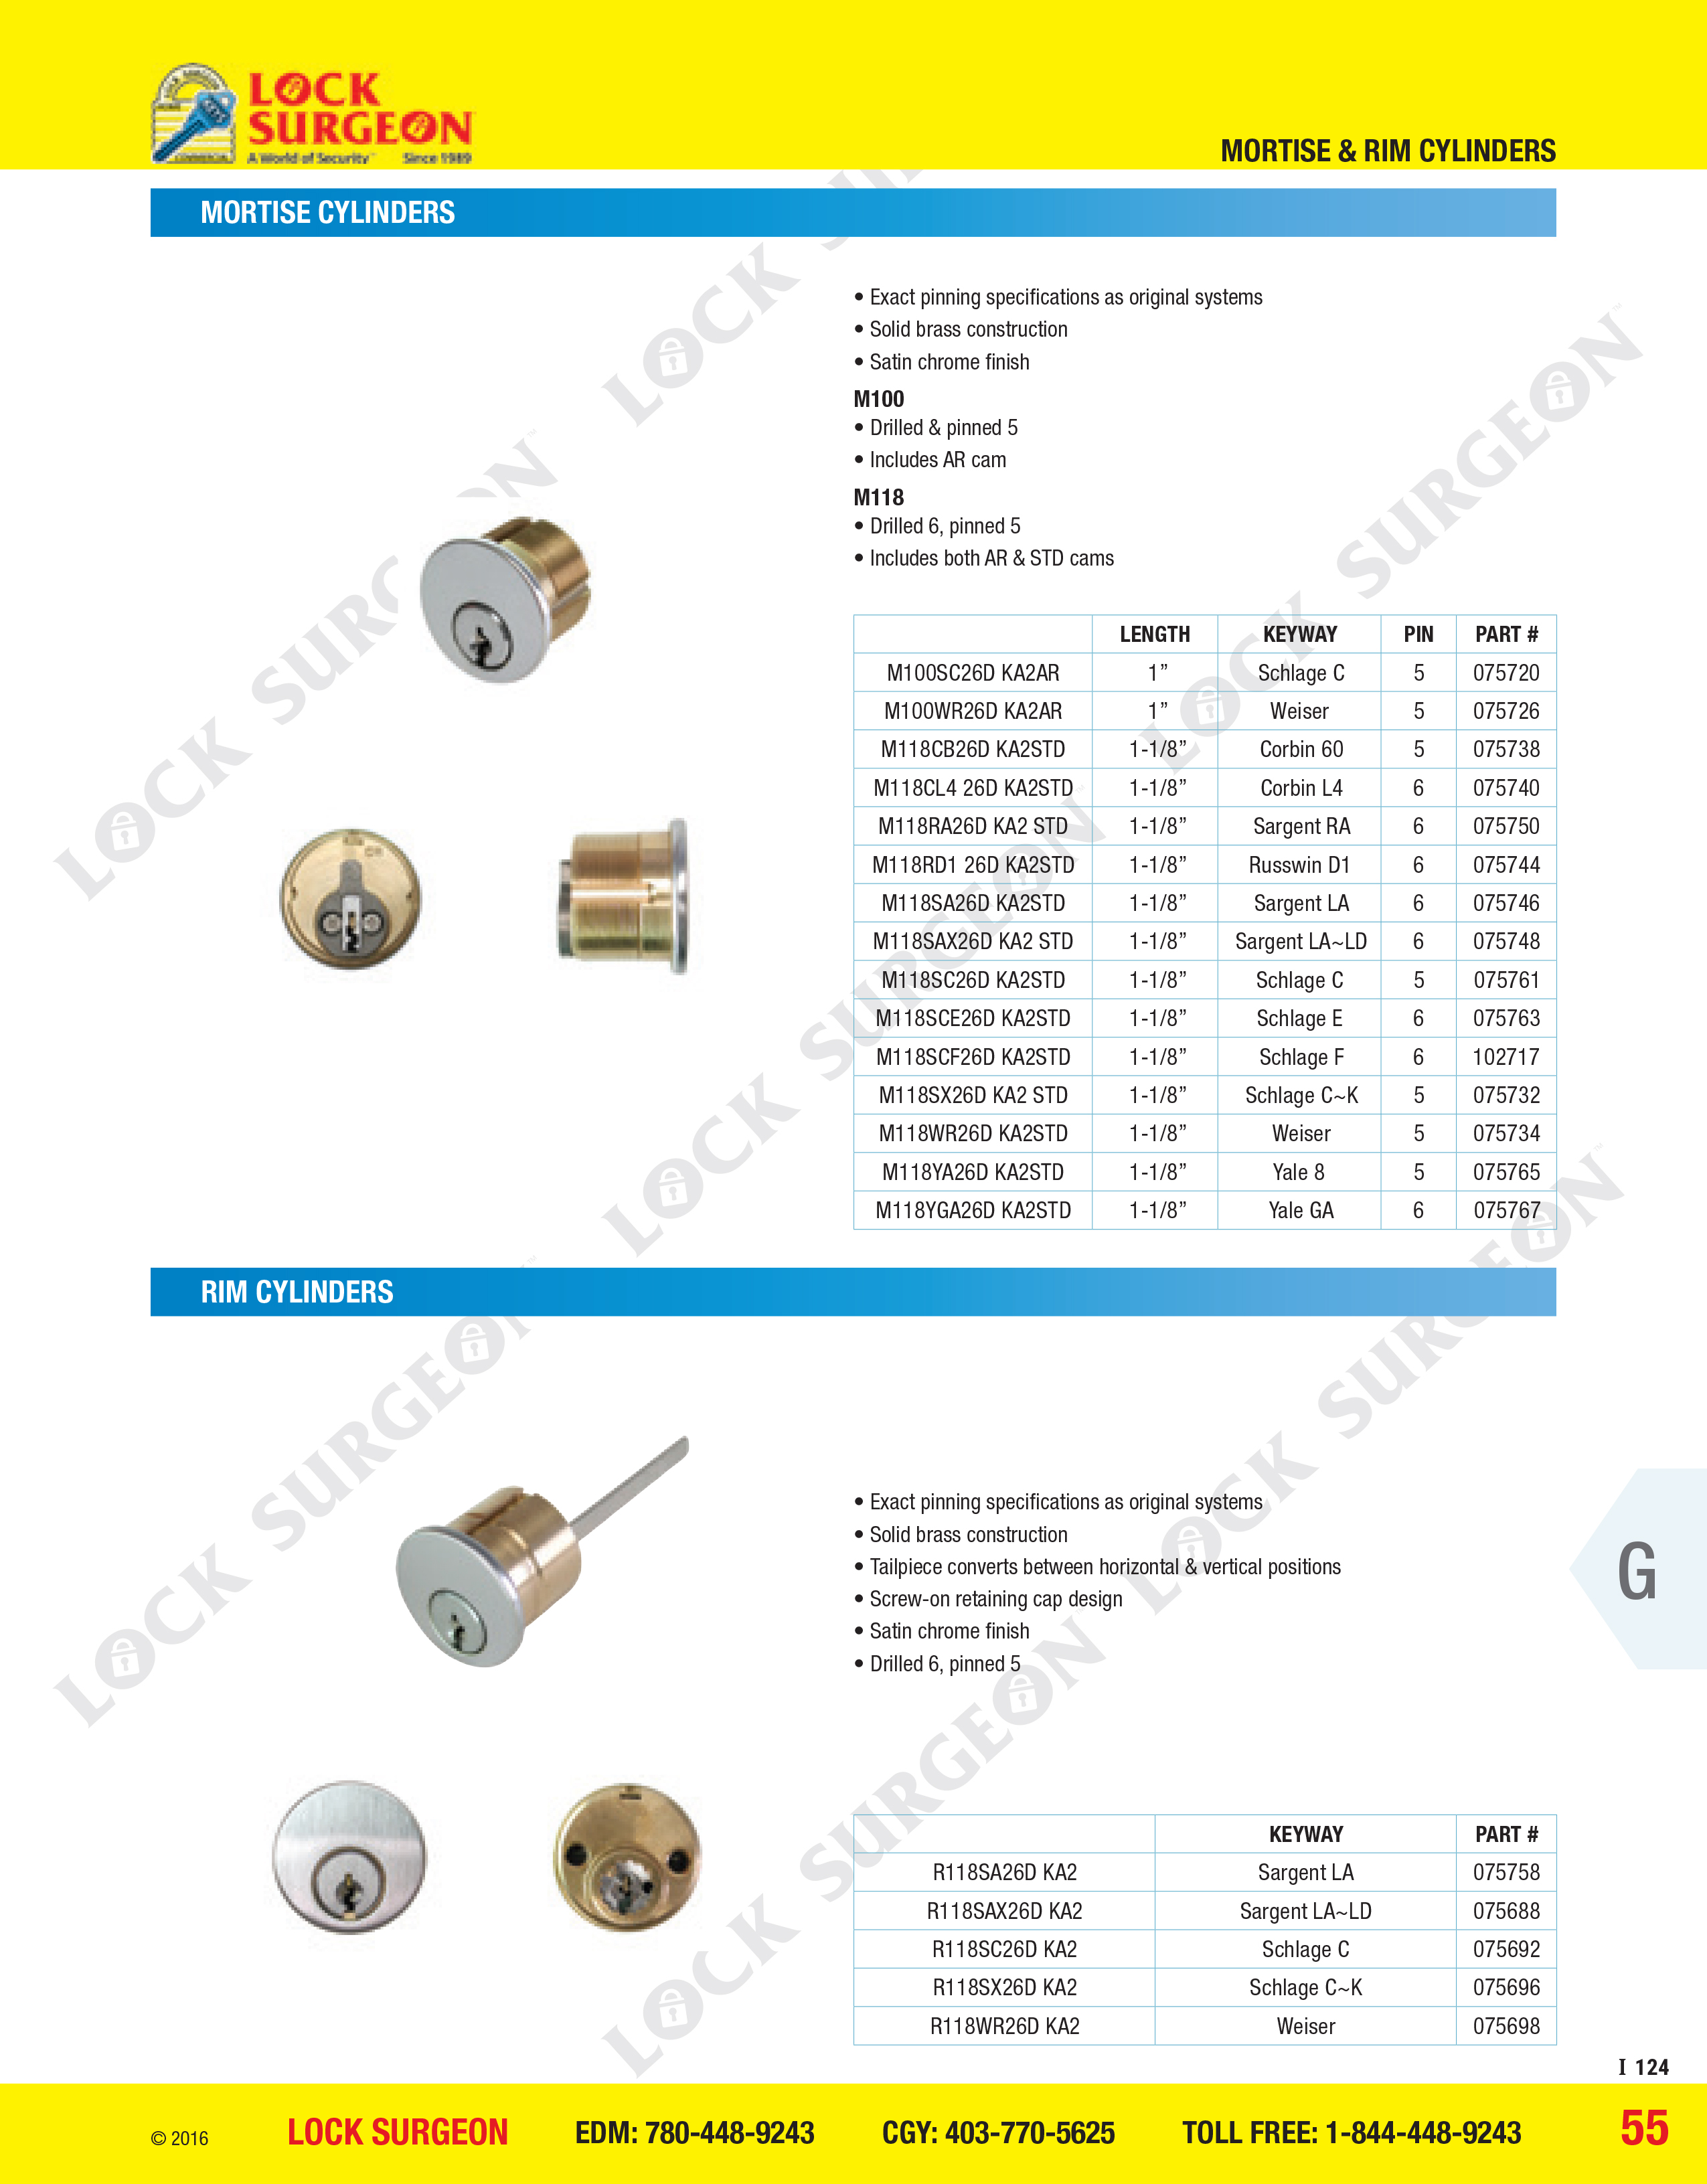 Acheson GMS mortise and rim cylinders solid brass construction satin chrome finish.